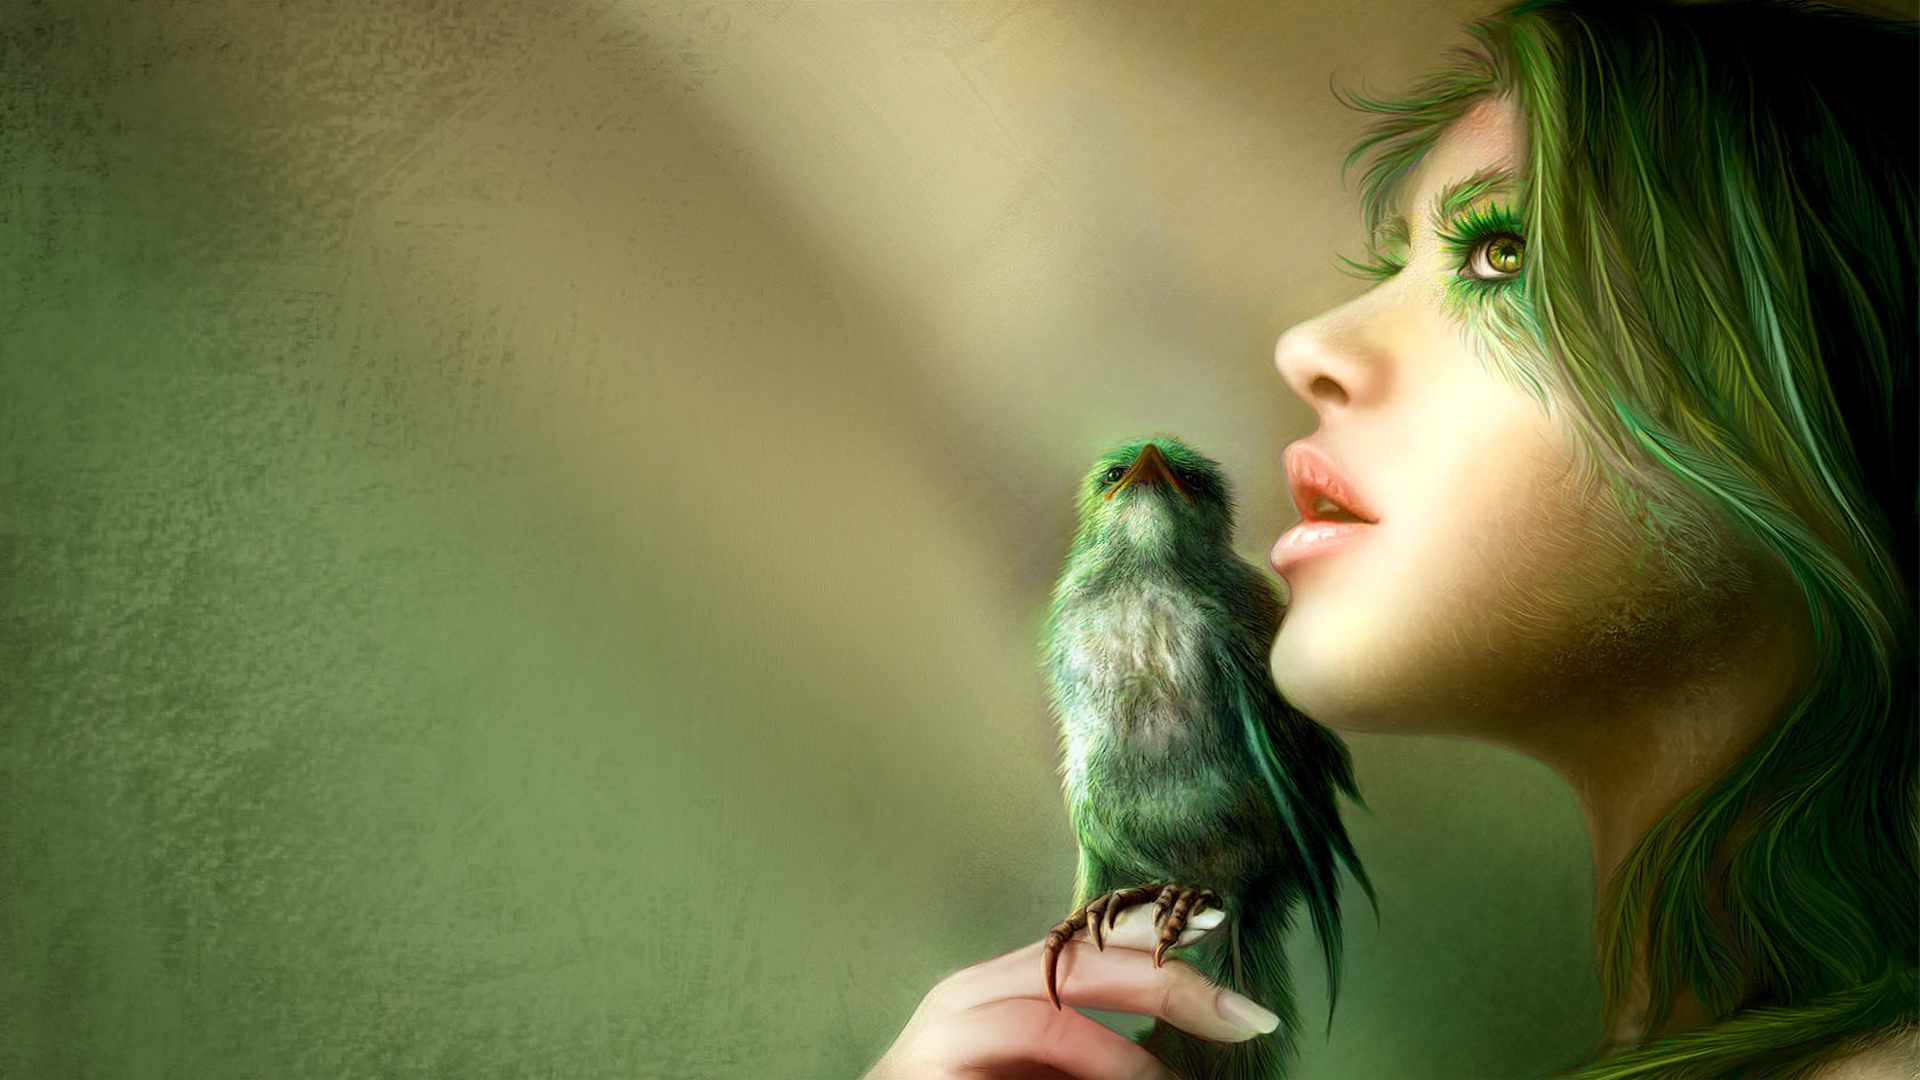 Green Bird Girl HD Wallpaper You Are Ing The Abstract